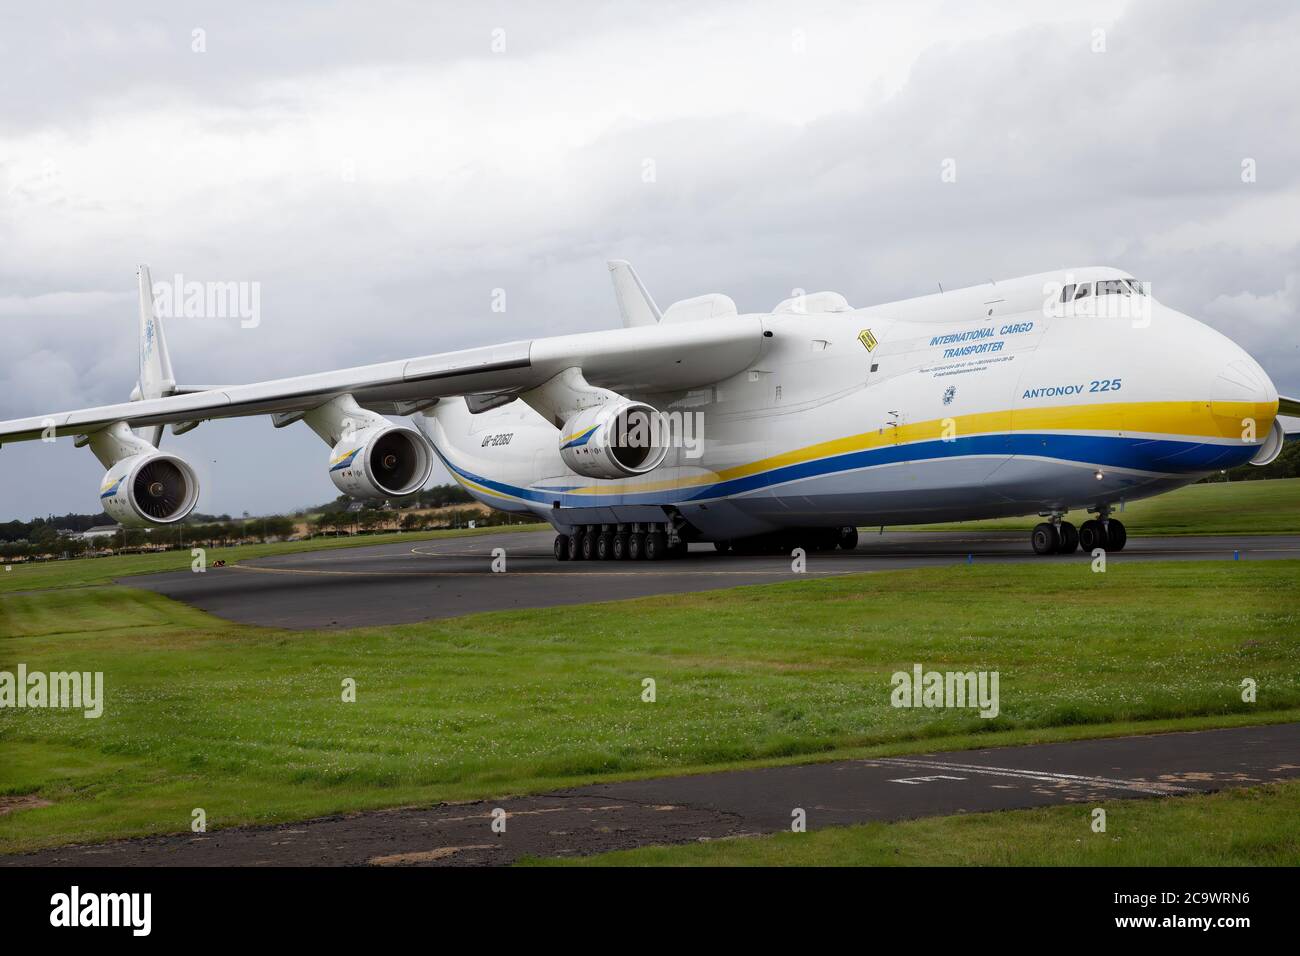 World Largest Aircraft. 2nd August Prestwick Airport UK. Antonov 225. Stock Photo